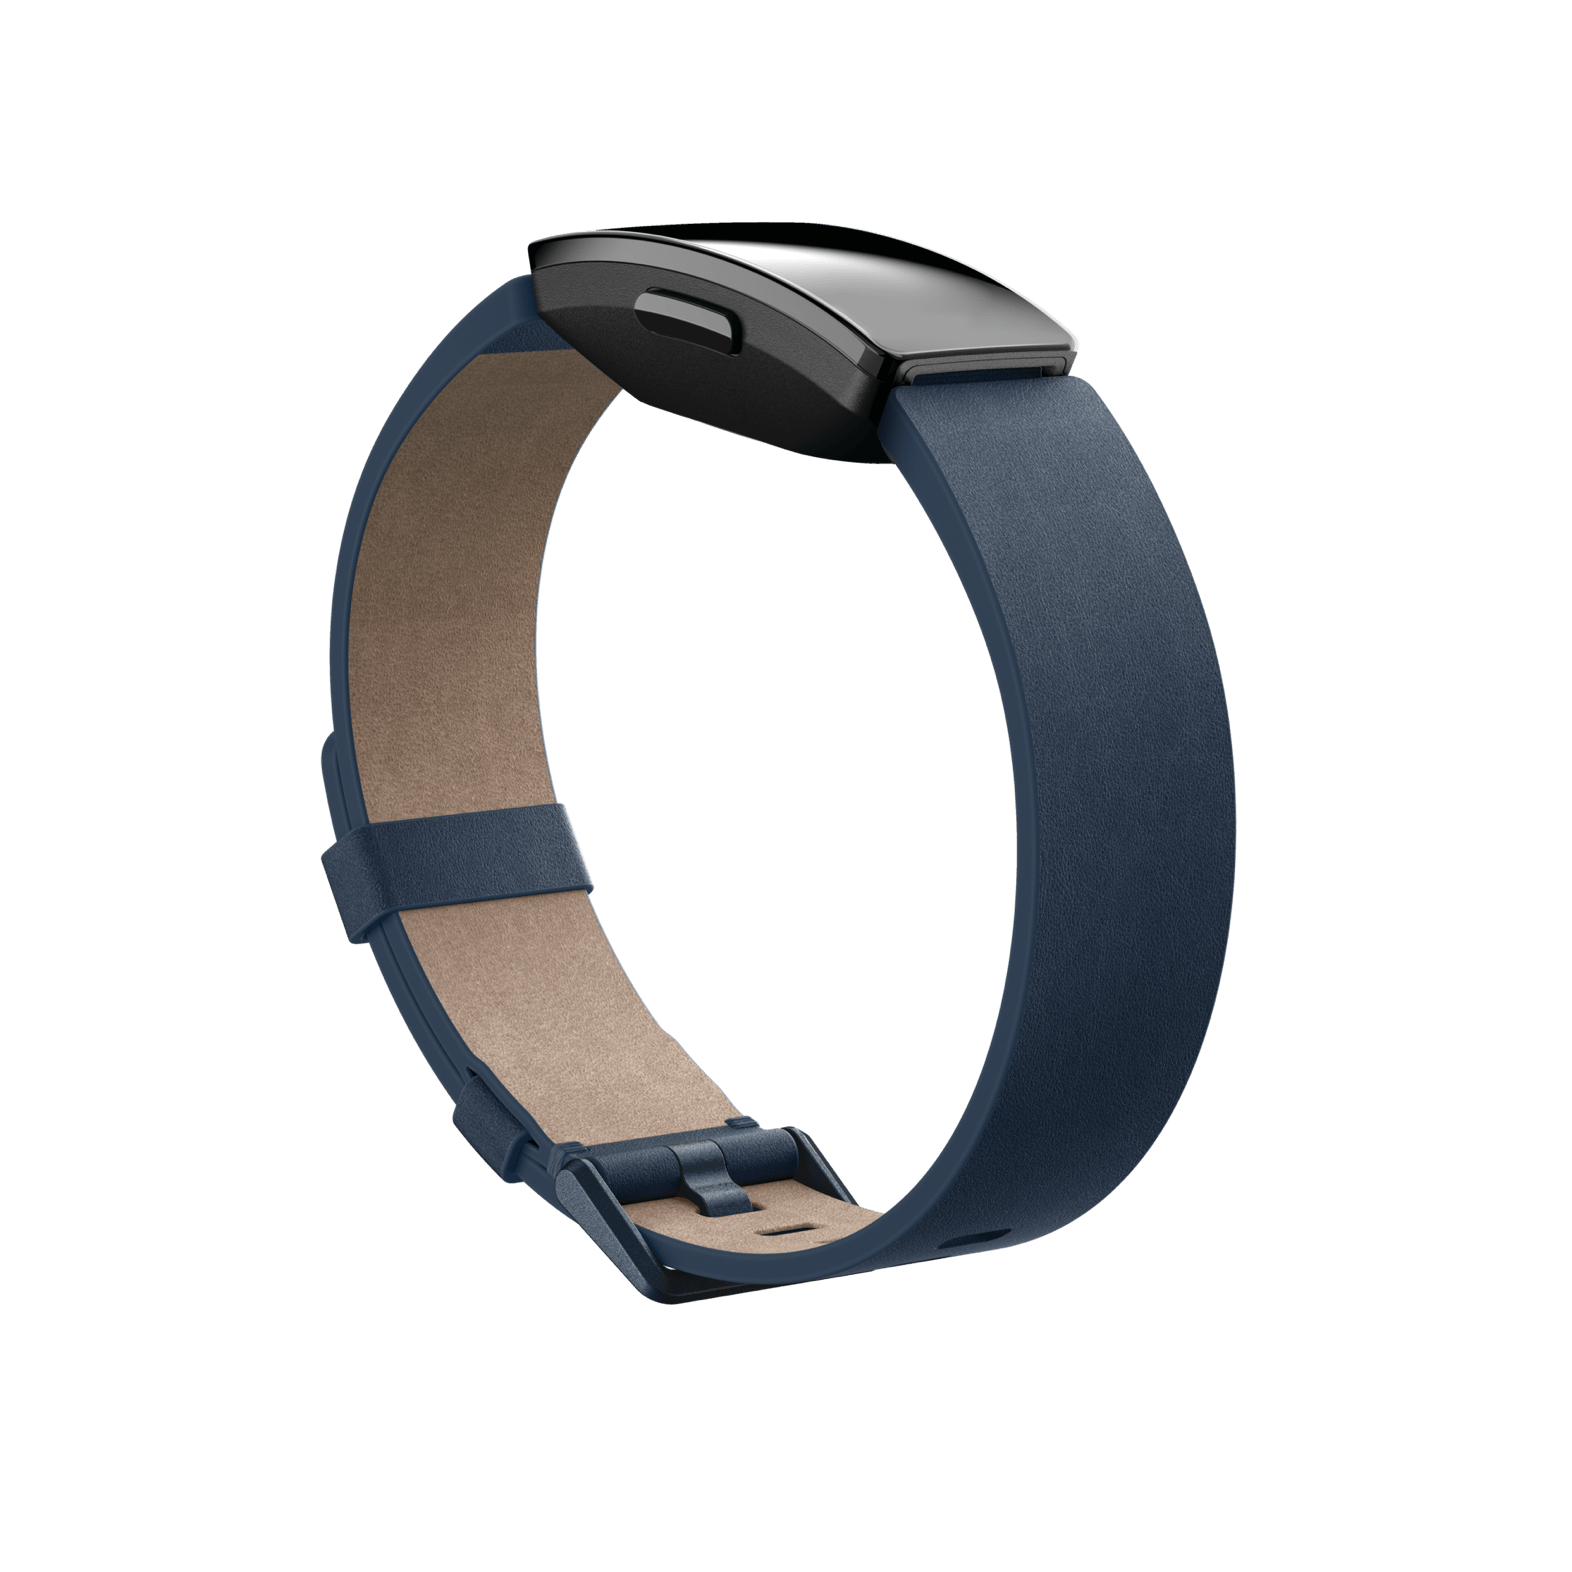 stores that sell fitbit bands